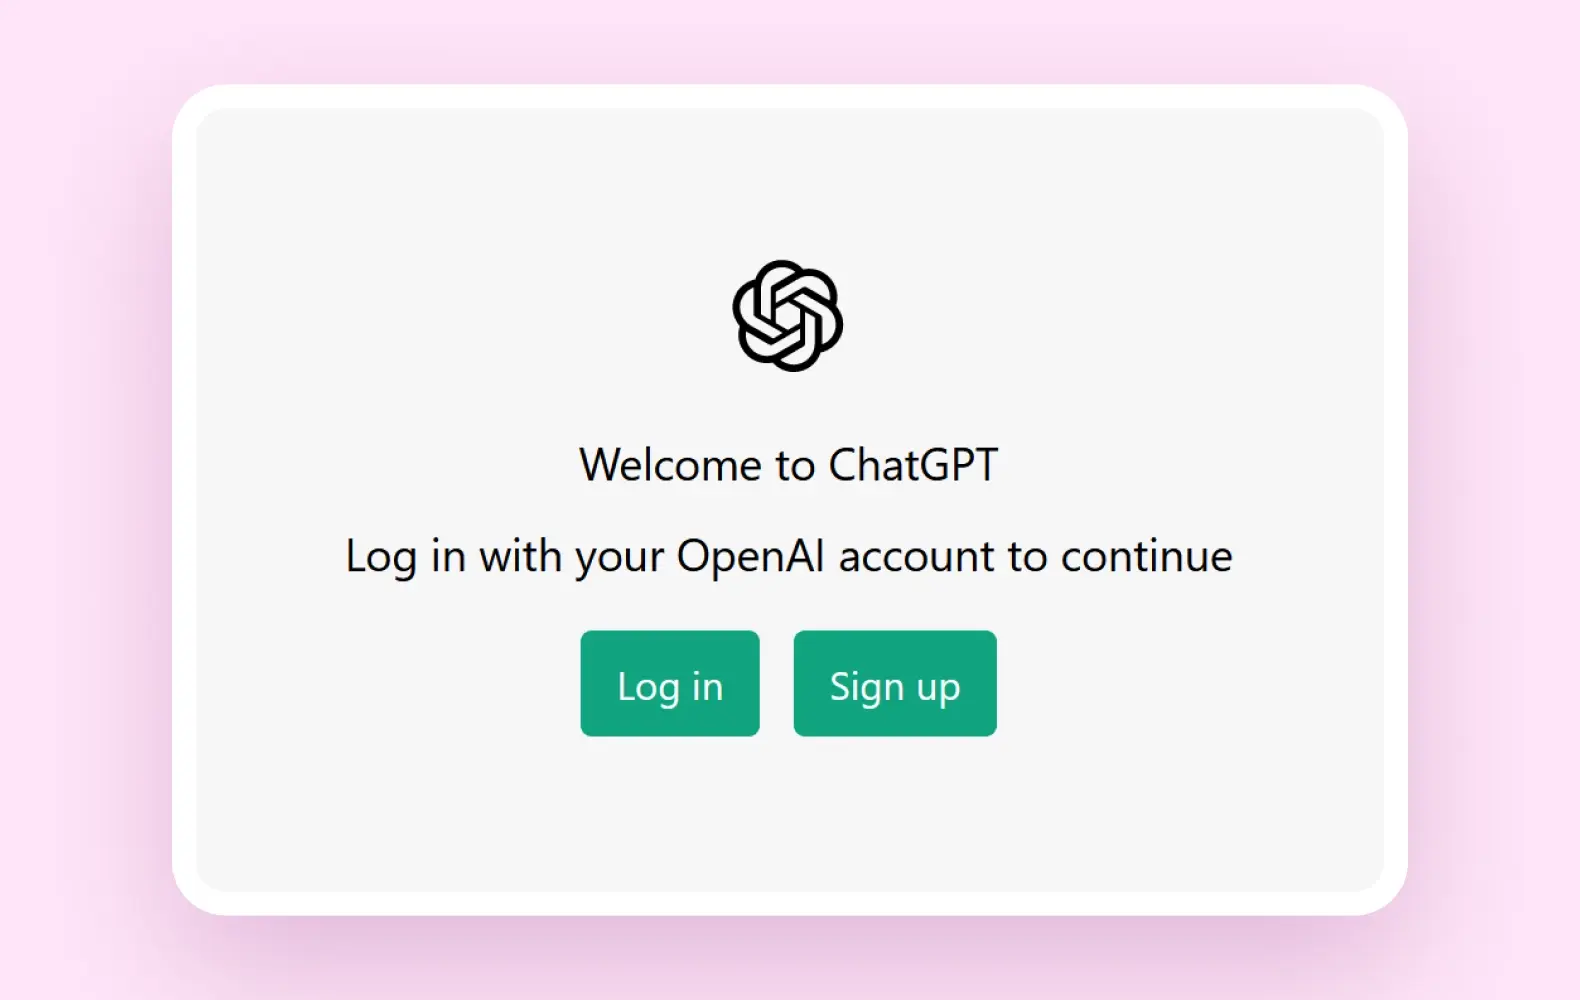 Welcome dialog box for ChatGPT, where you can create a new account or log in.